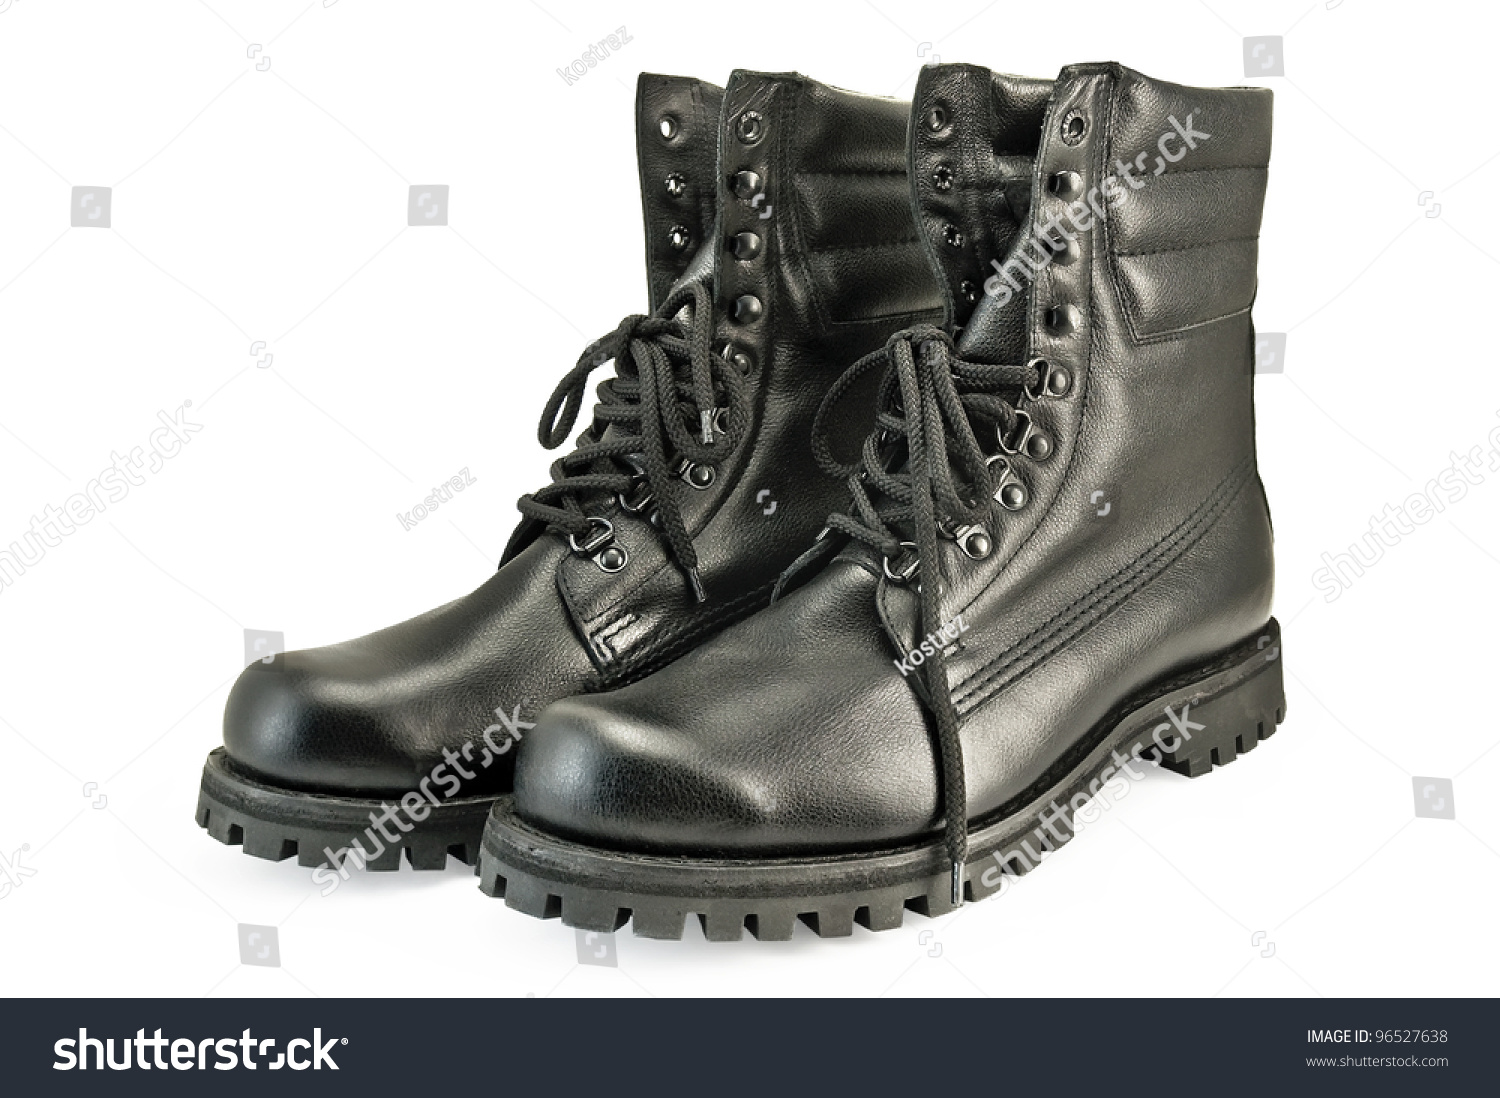 A Pair Of Tall Black Leather Boots Army Is Isolated On A White